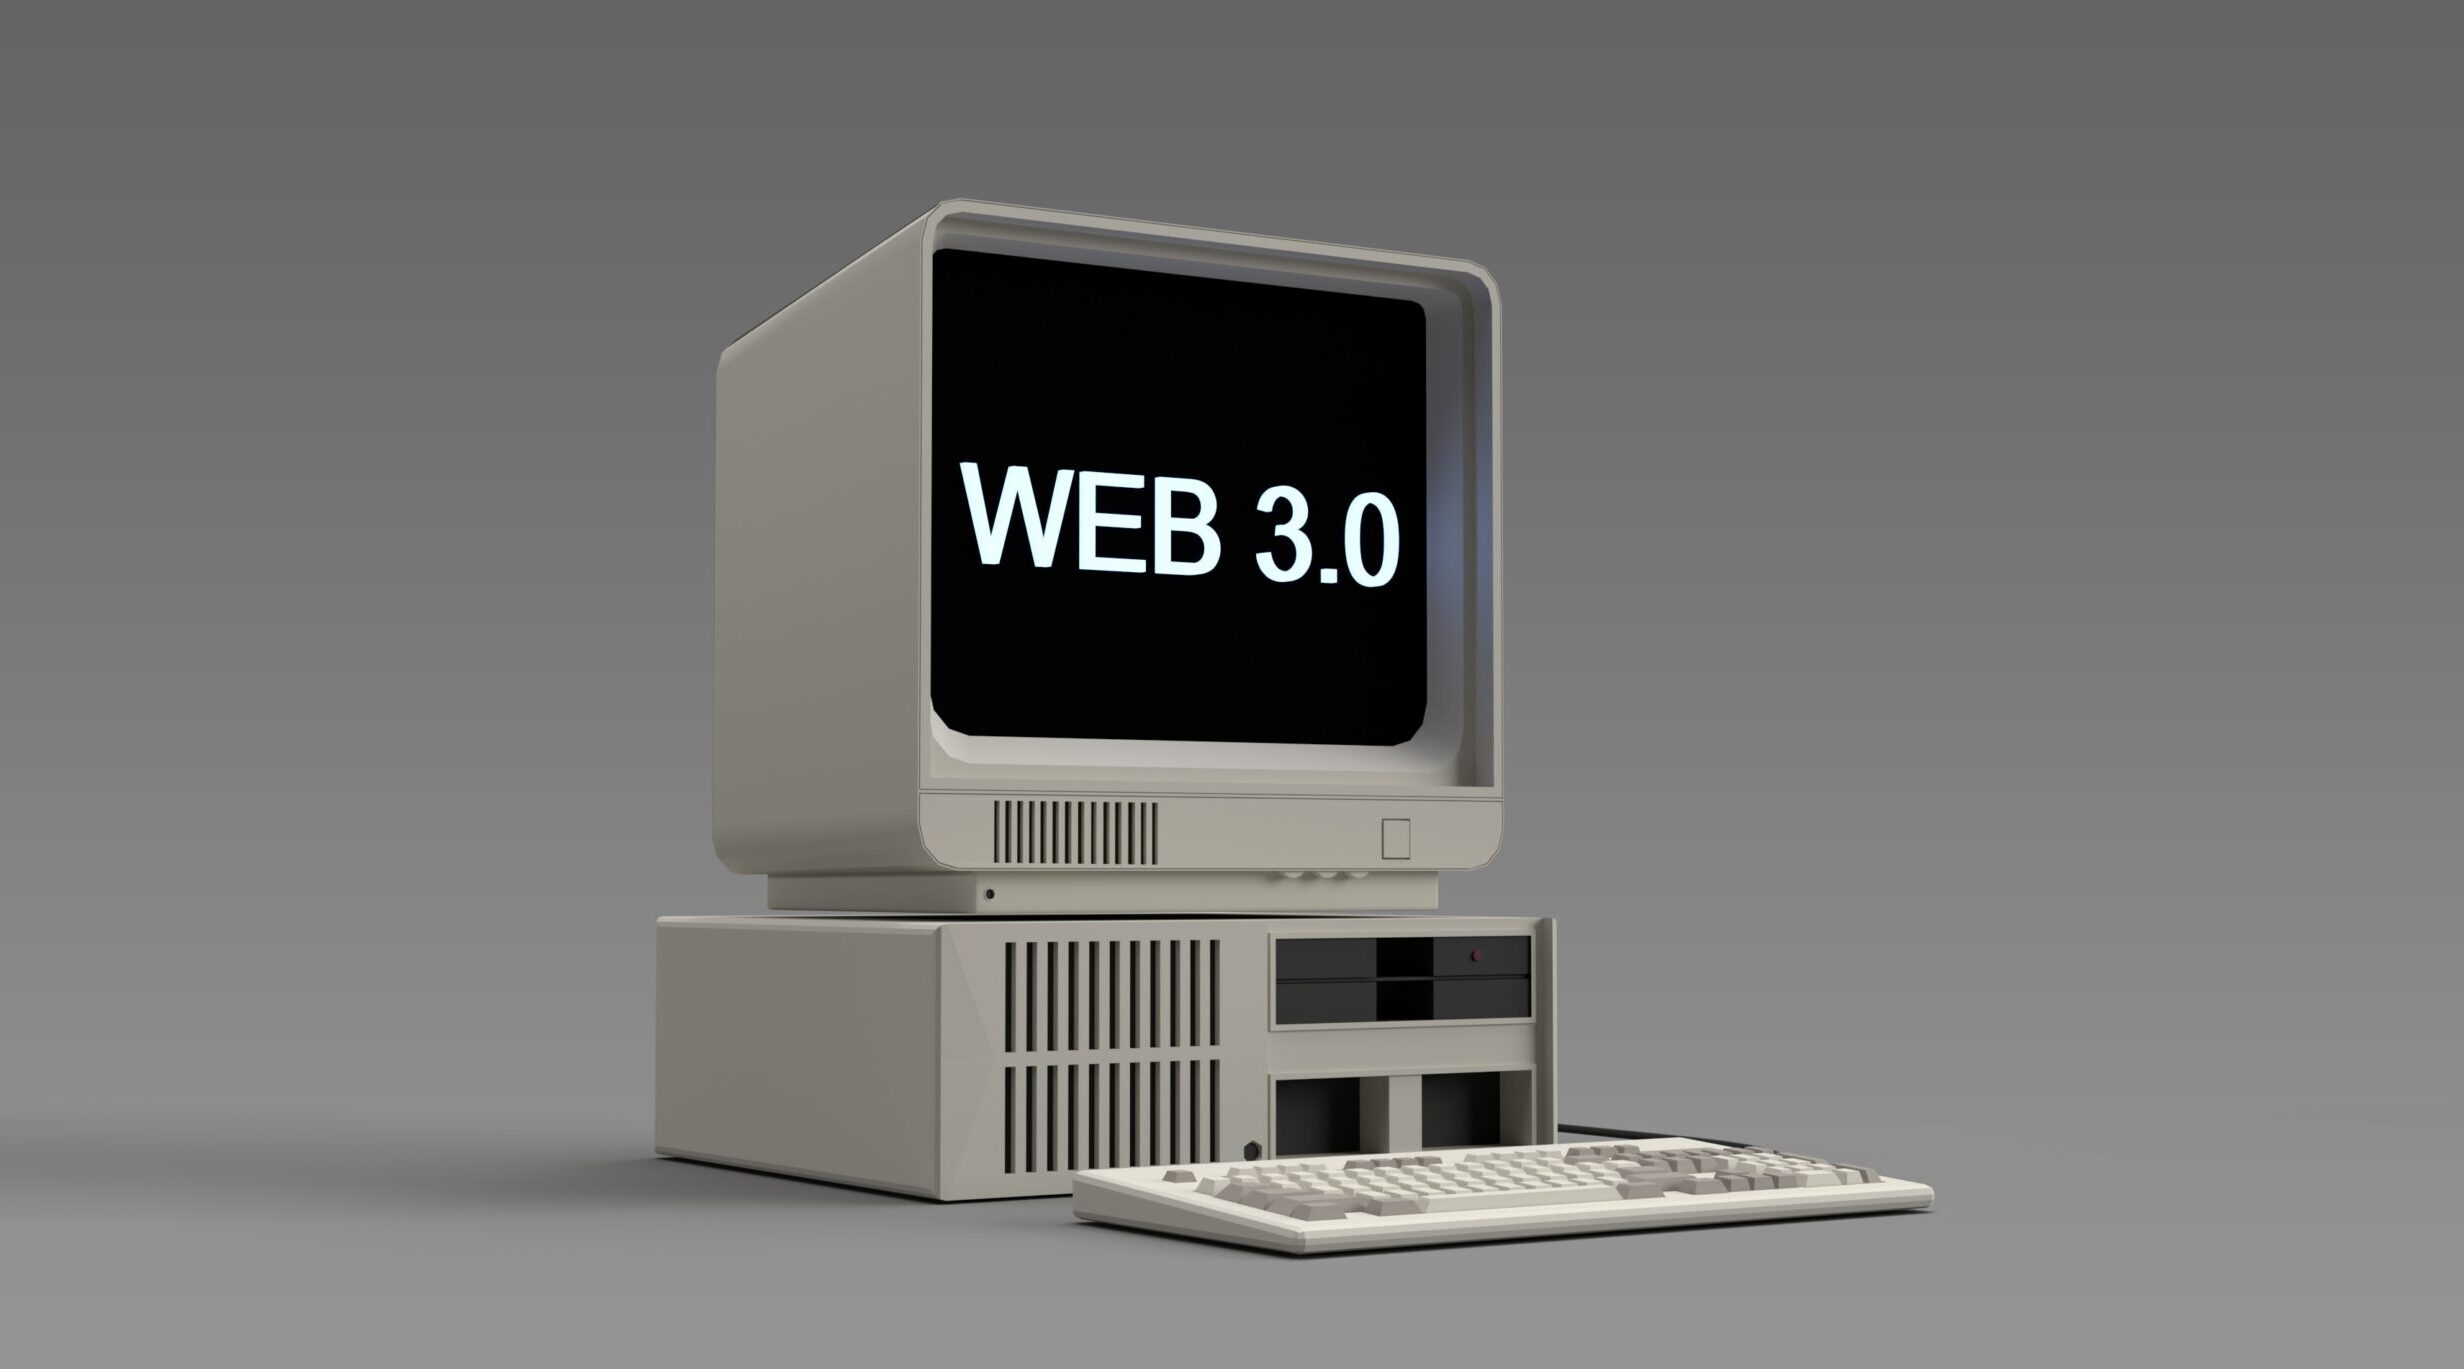 How Web 3.0 Will Change Everything